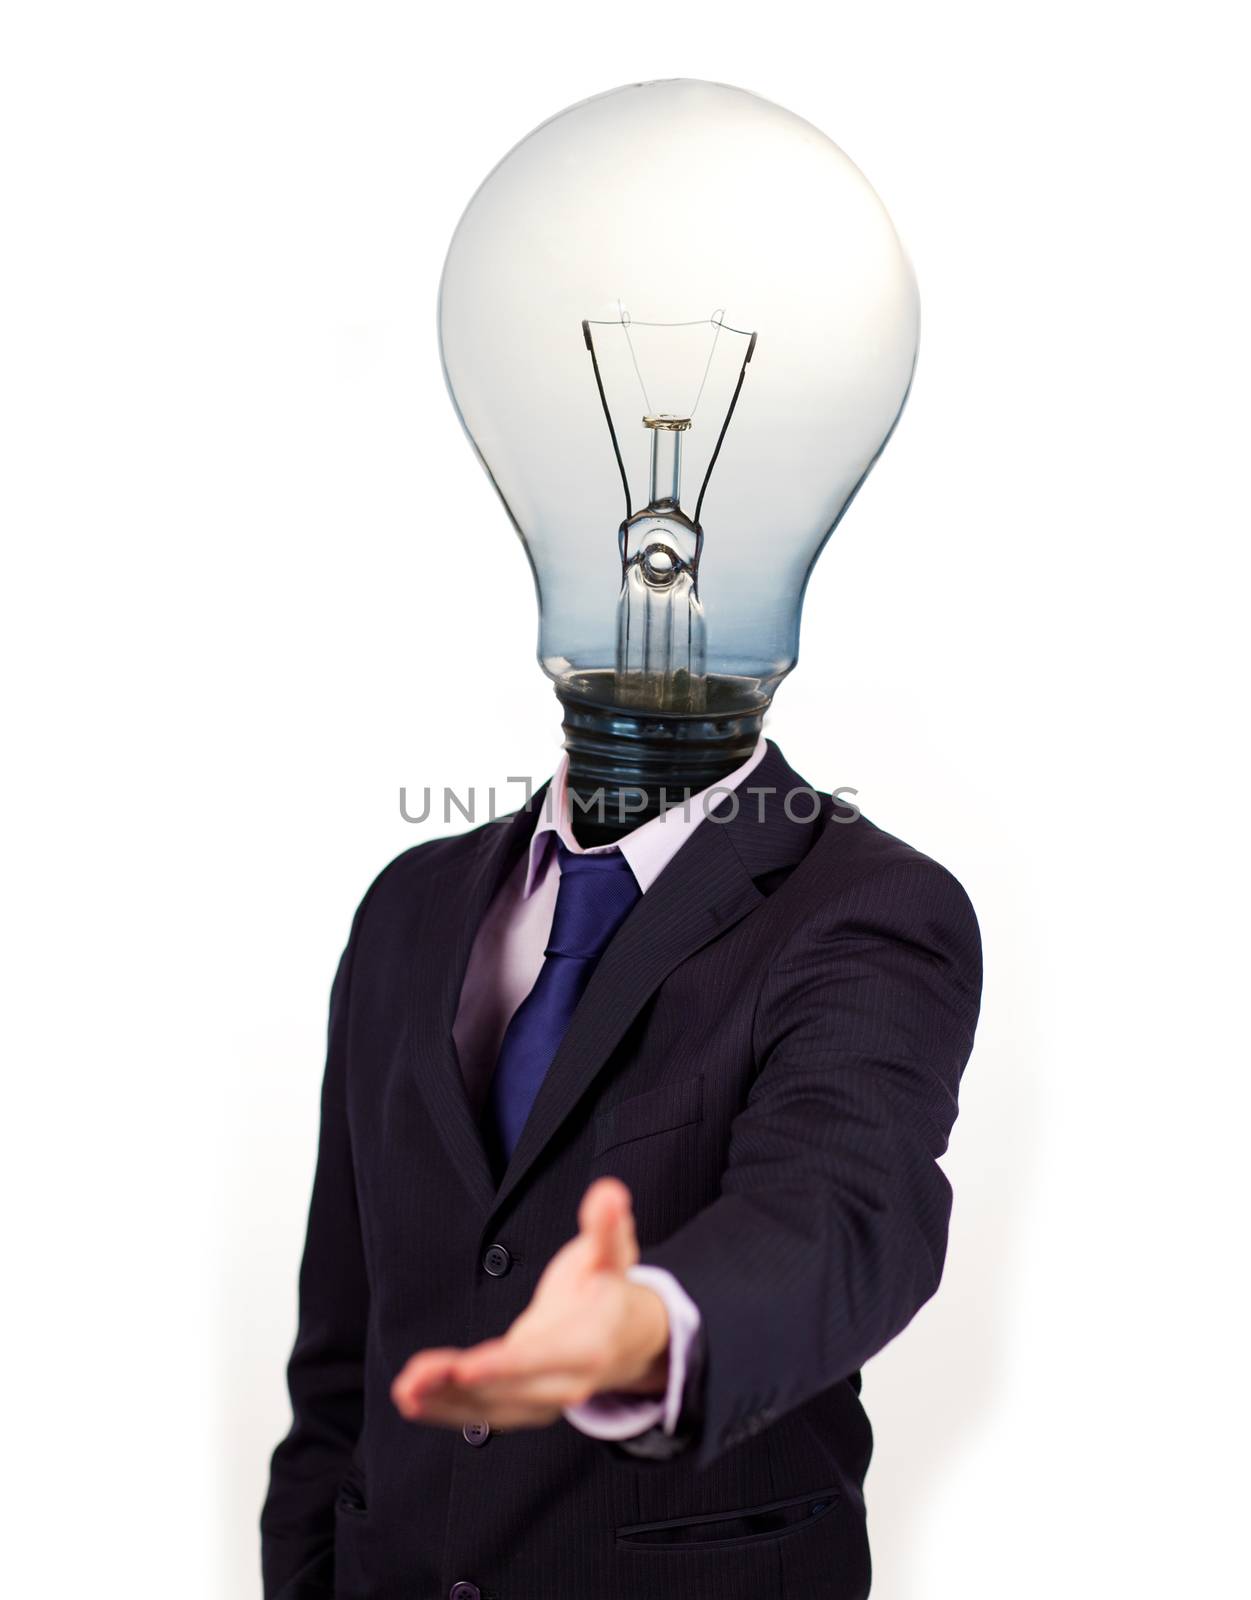 Businessman with a light bulb head holding his hand out